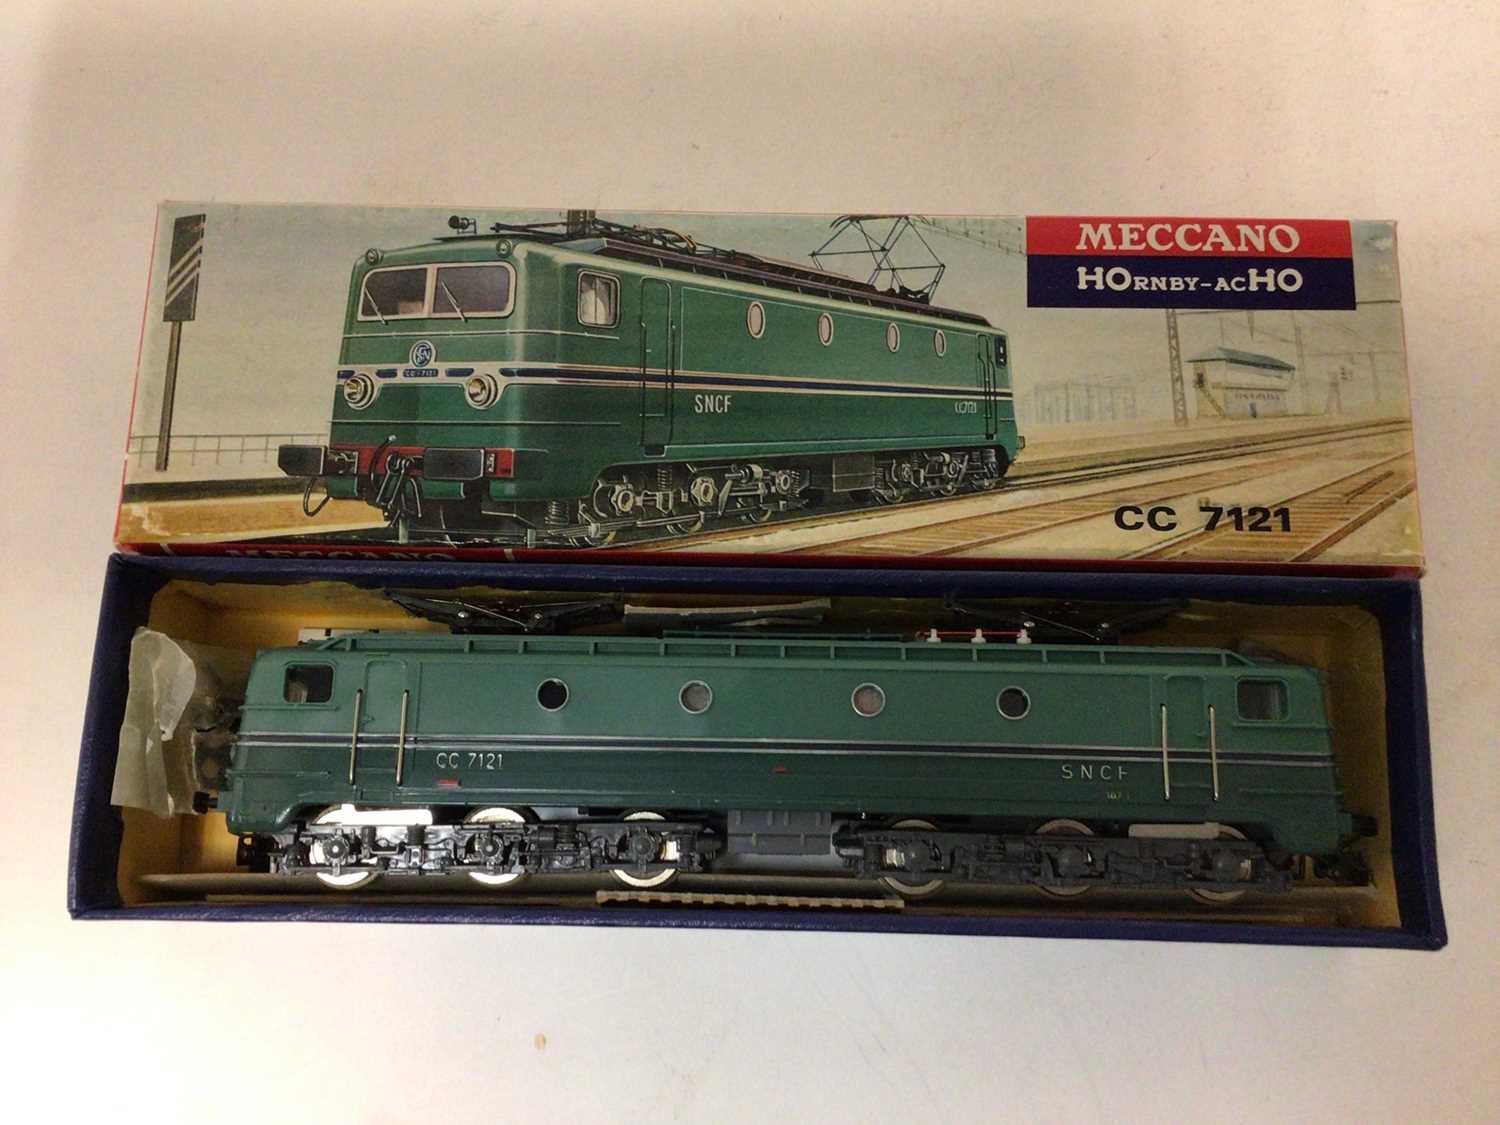 Meccano HOrnby acHO locomotives including SNCF CC 7121 electric locomotive, boxed 6372, SNCF BB 16.